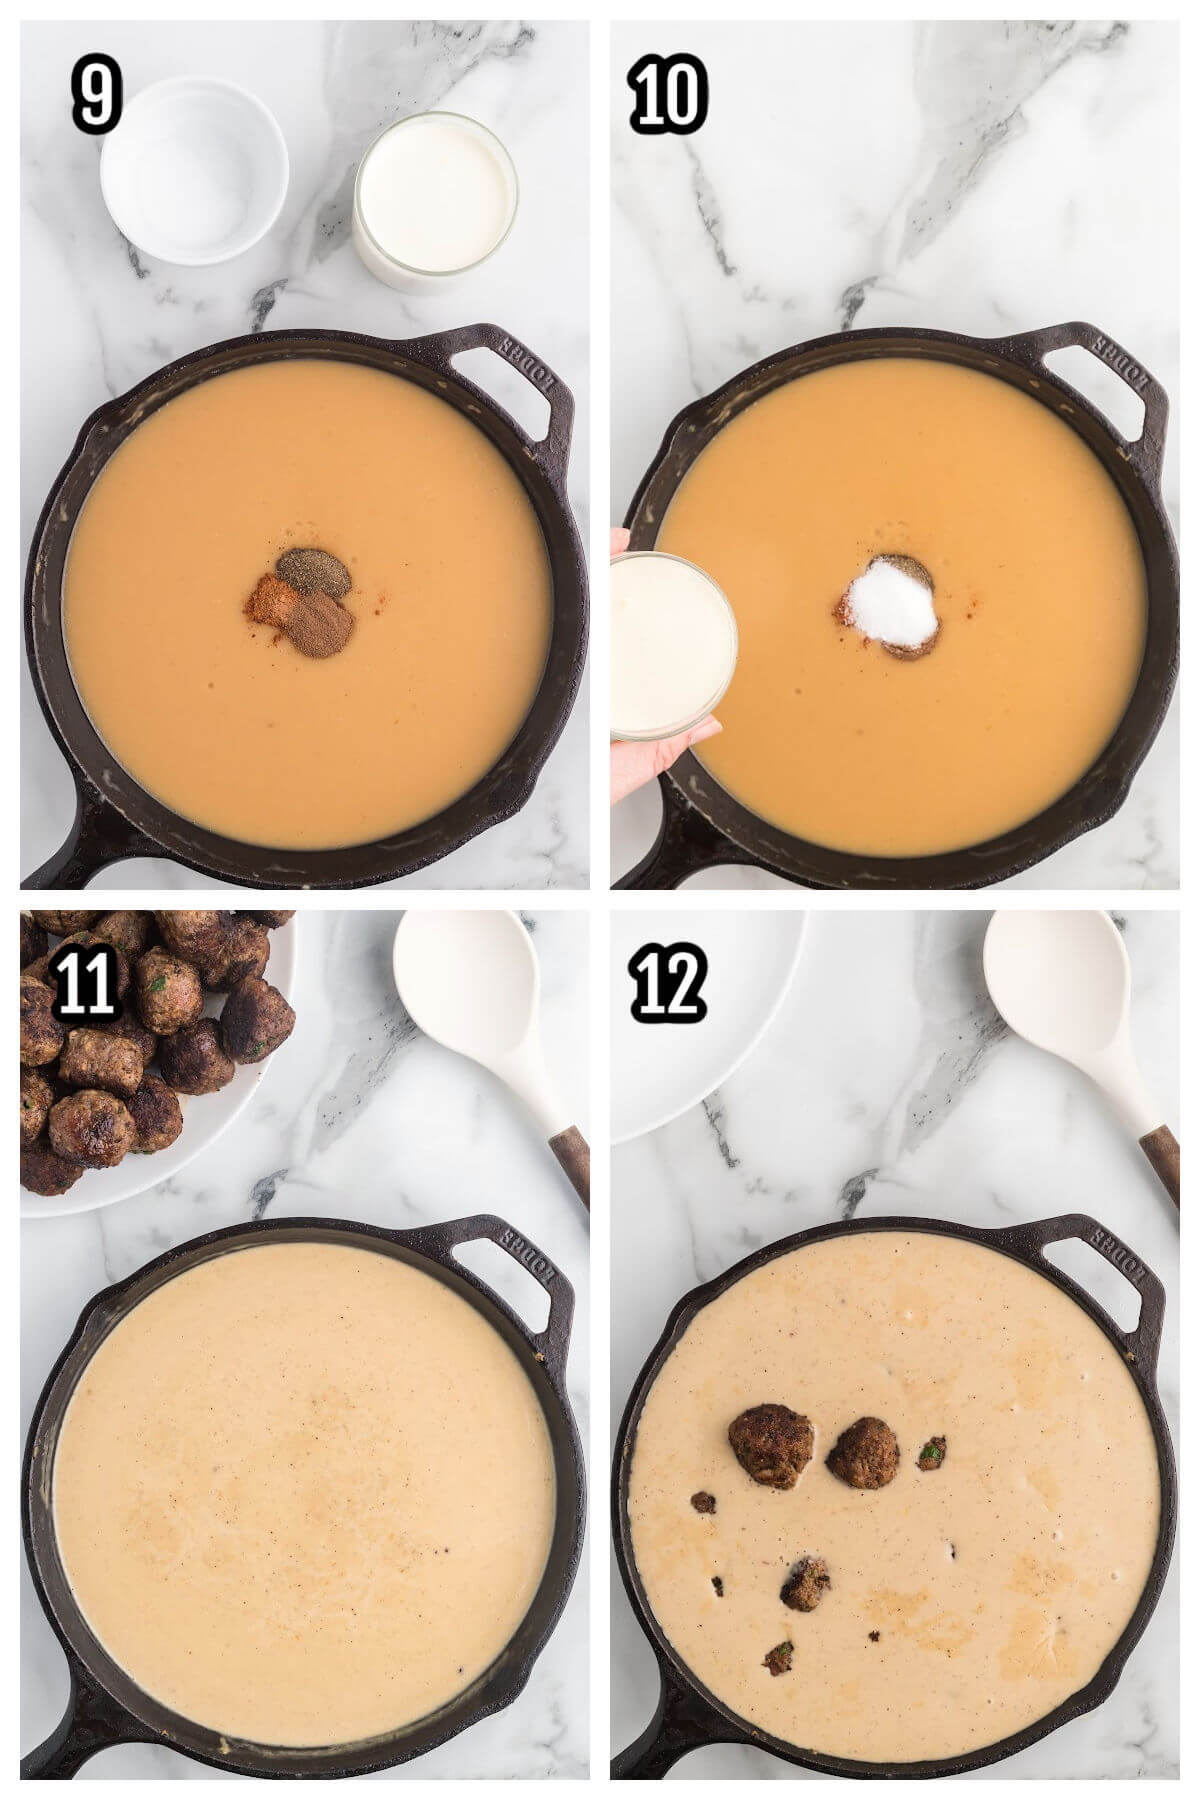 Collage of the final four steps to making the Swedish gravy with Meatballs in an iron skillet. 